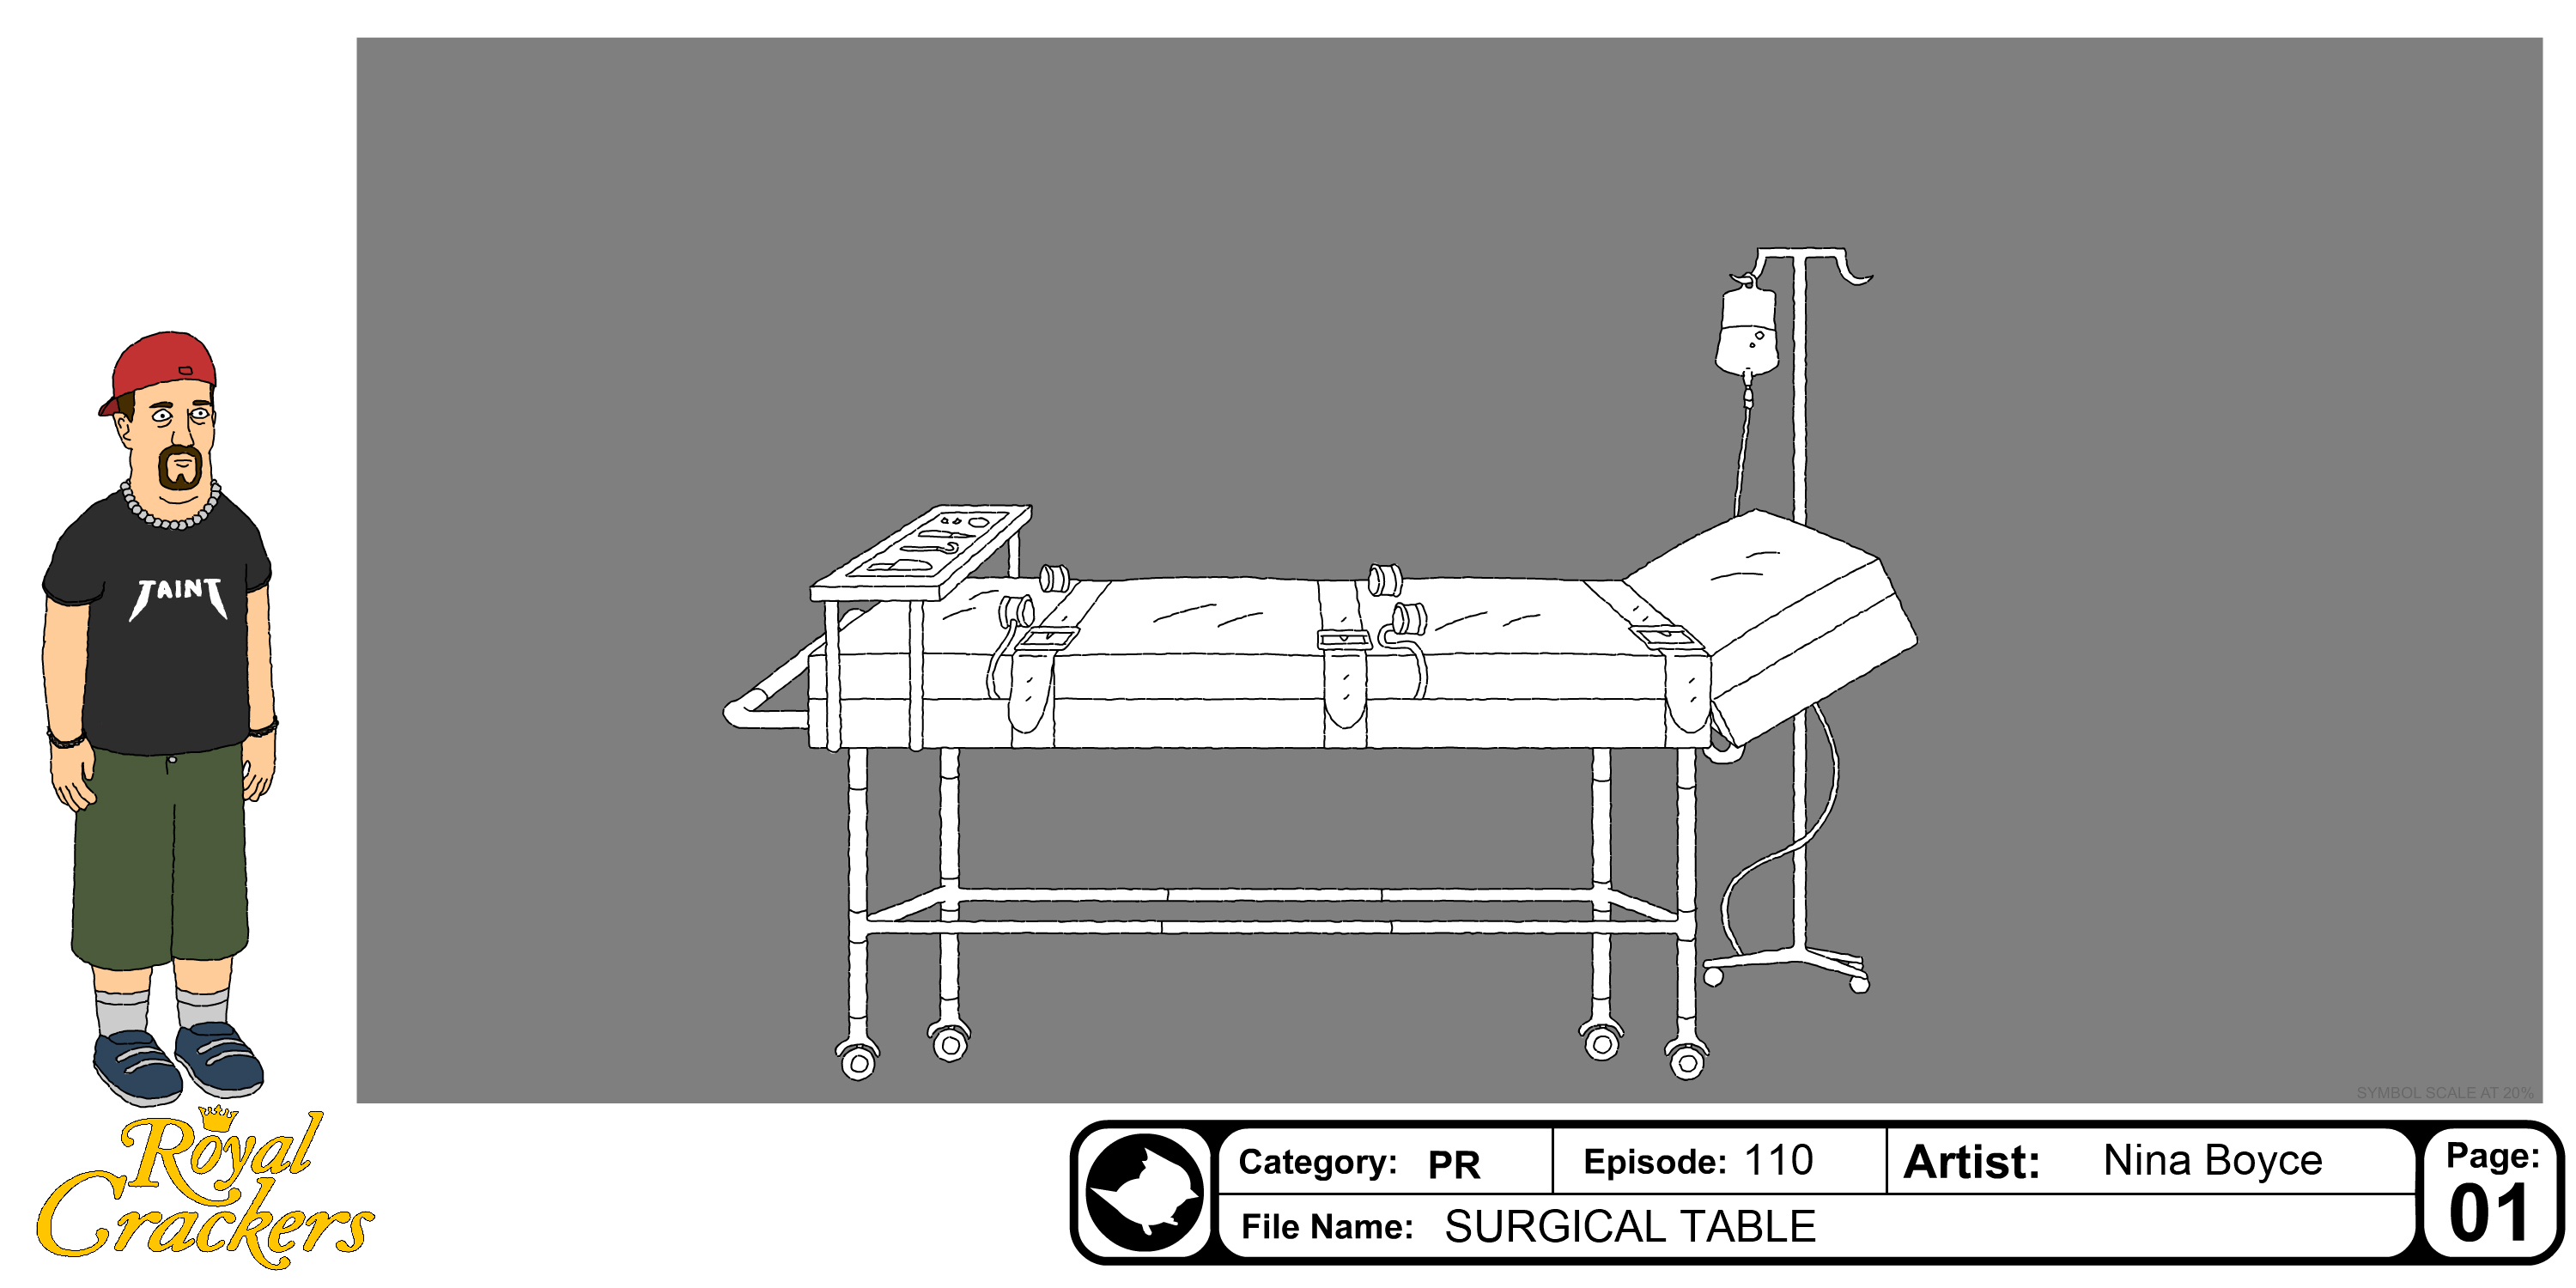 ROY110_PR_A372_SURGICAL_TABLE_DAY_V02_NB.jpg